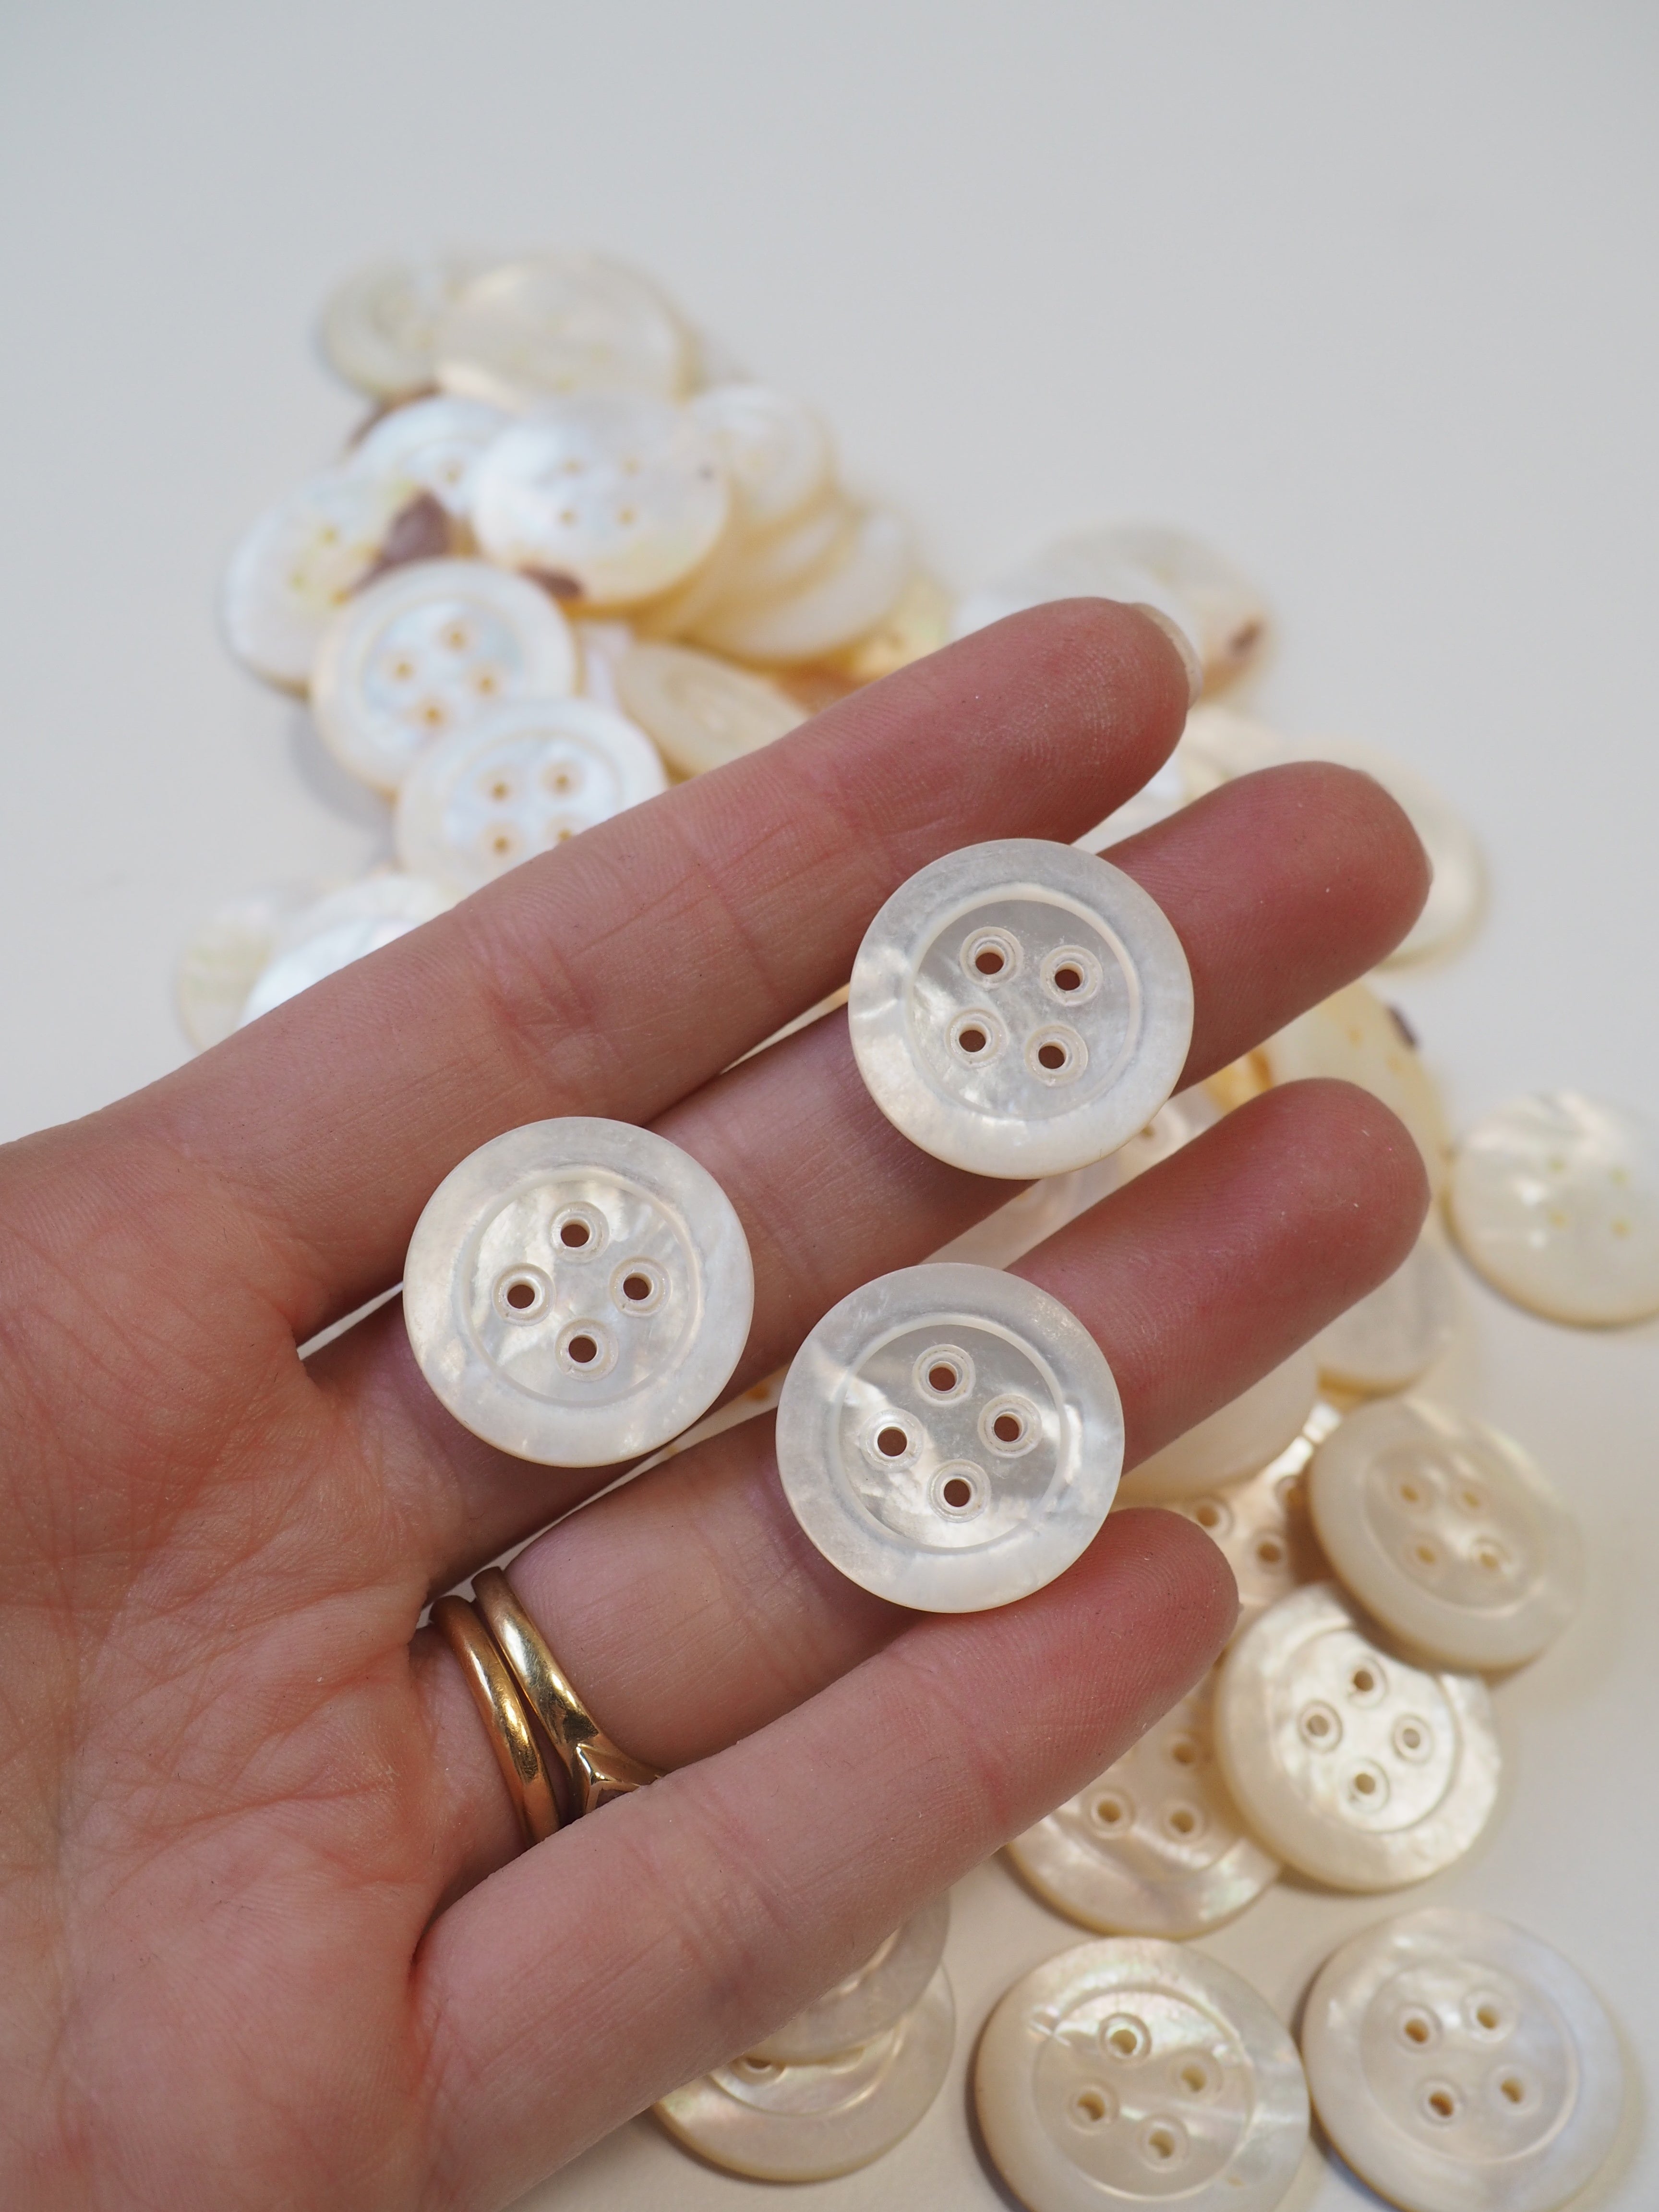 Square White Pearl Shell 11/16 Buttons, Pack of 5. #BN658 – The